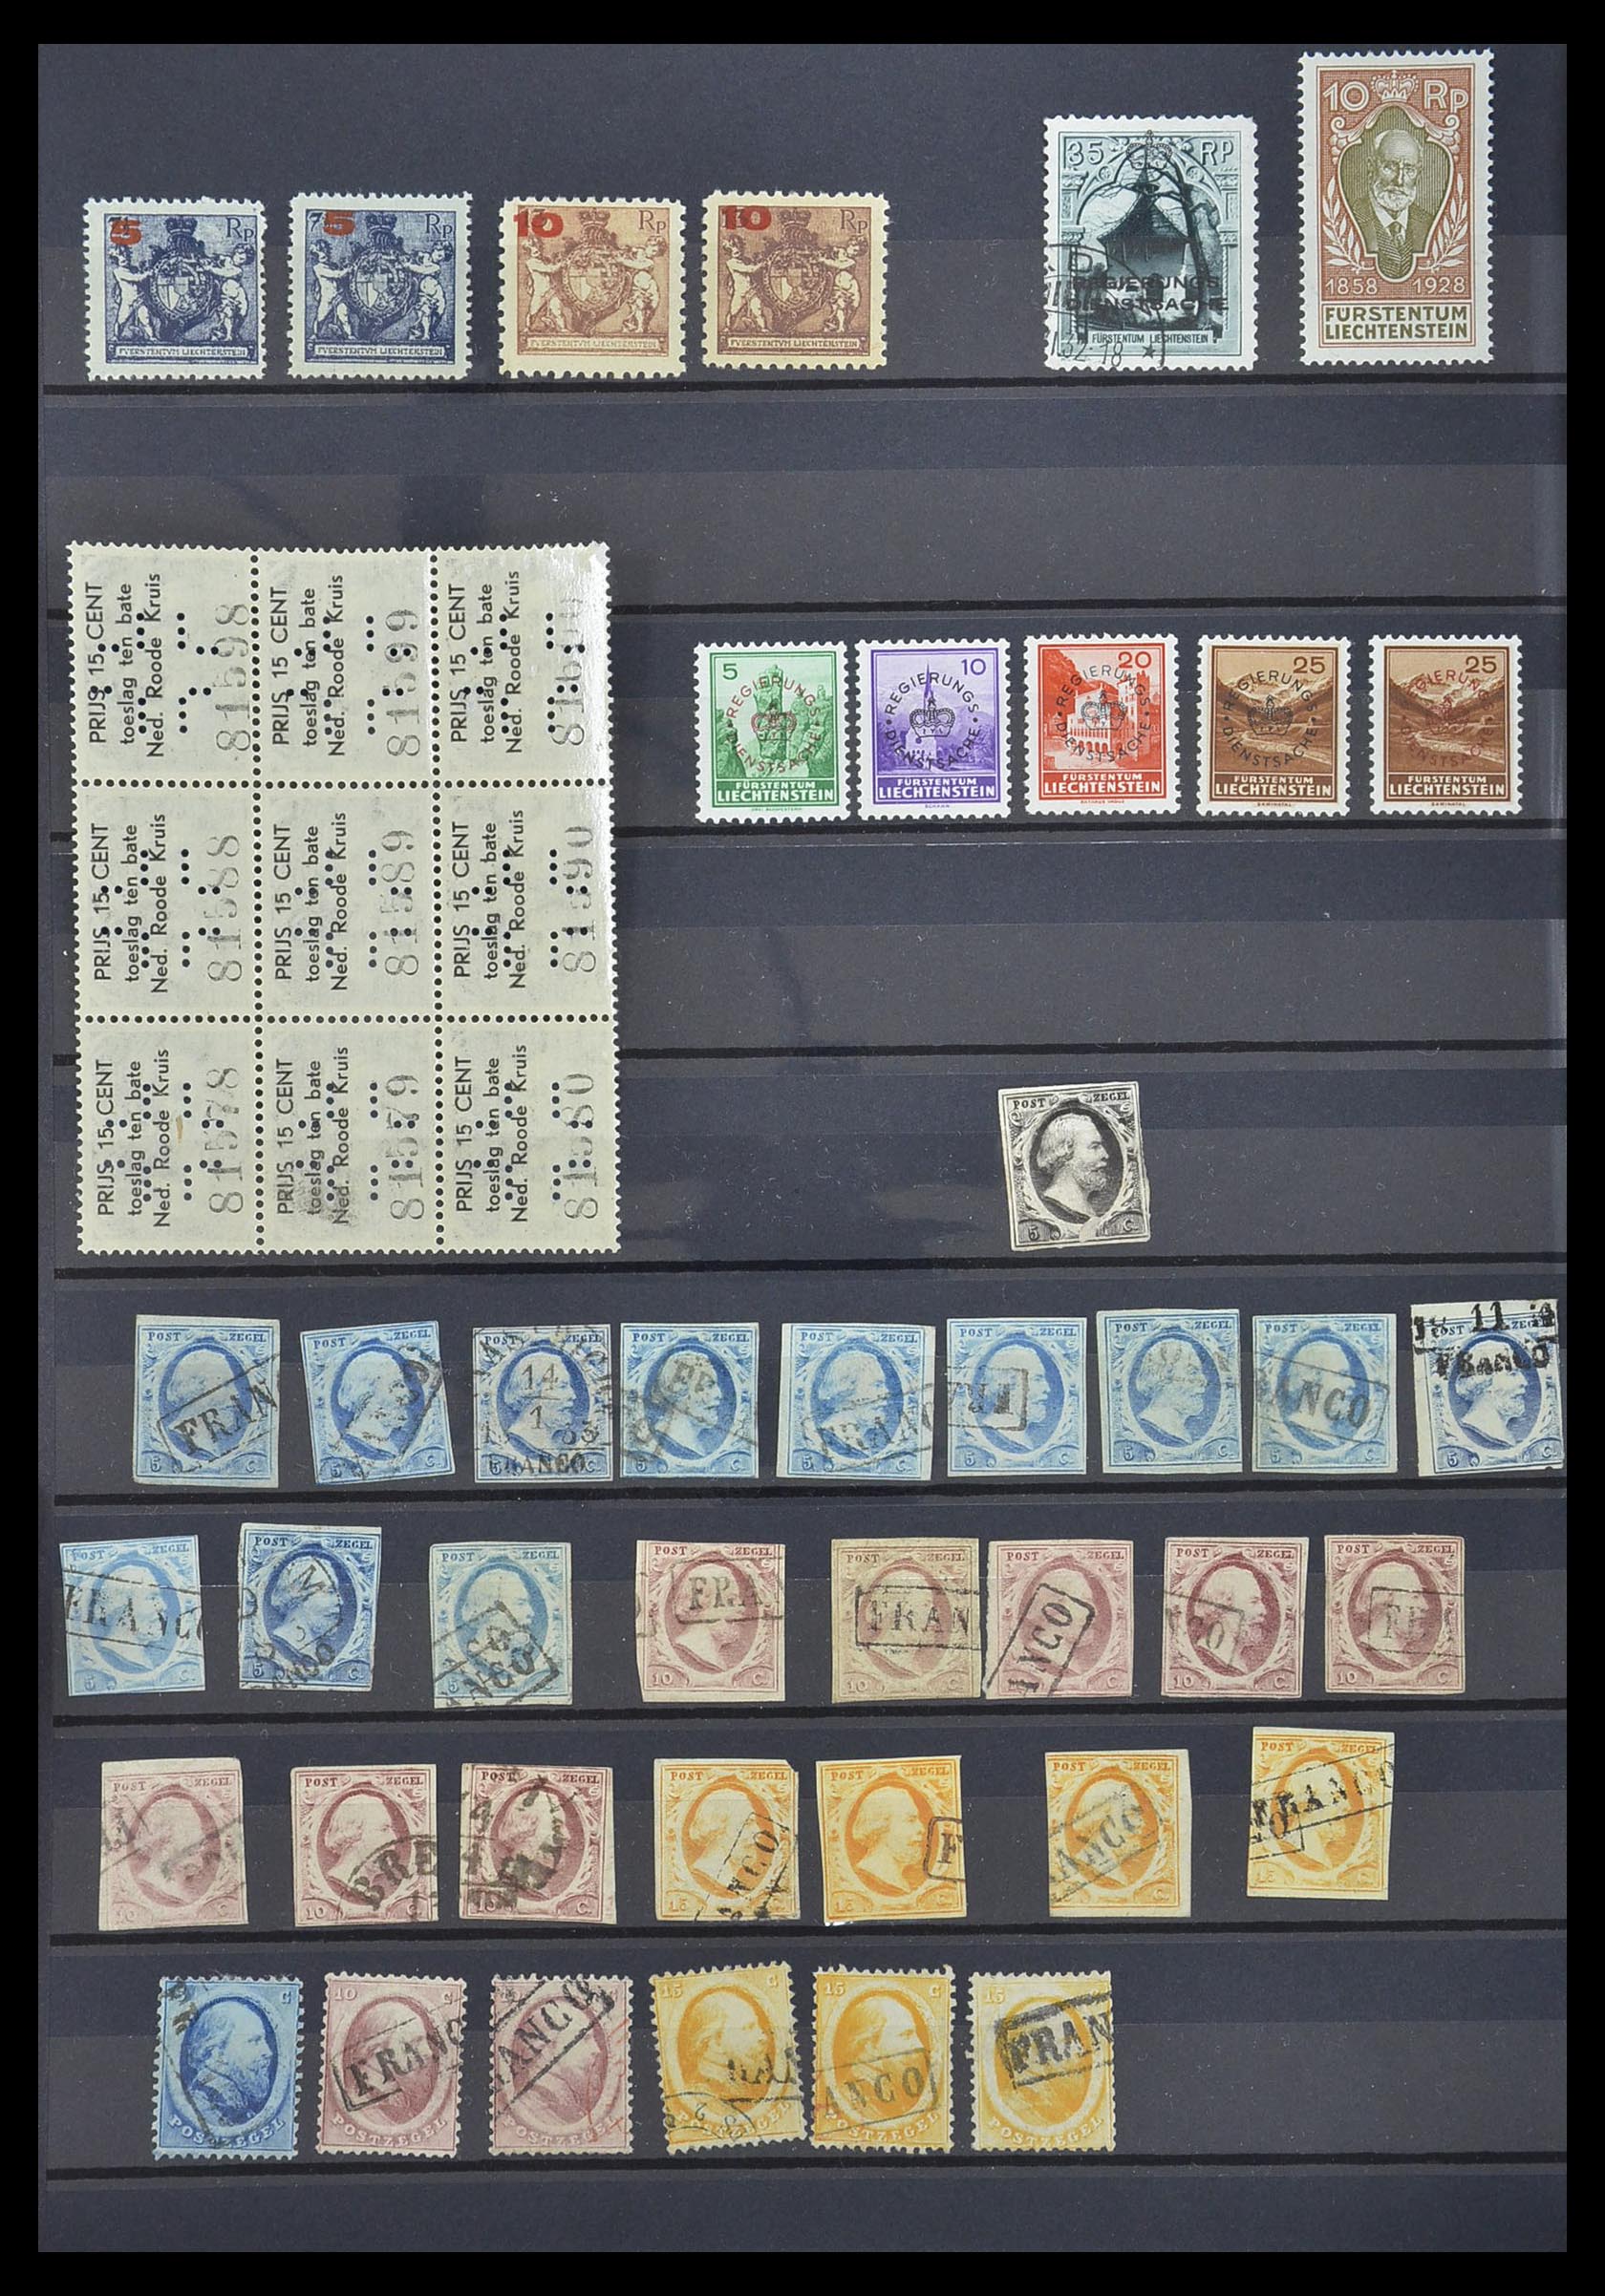 33756 024 - Stamp collection 33756 World classic 1850-1930.